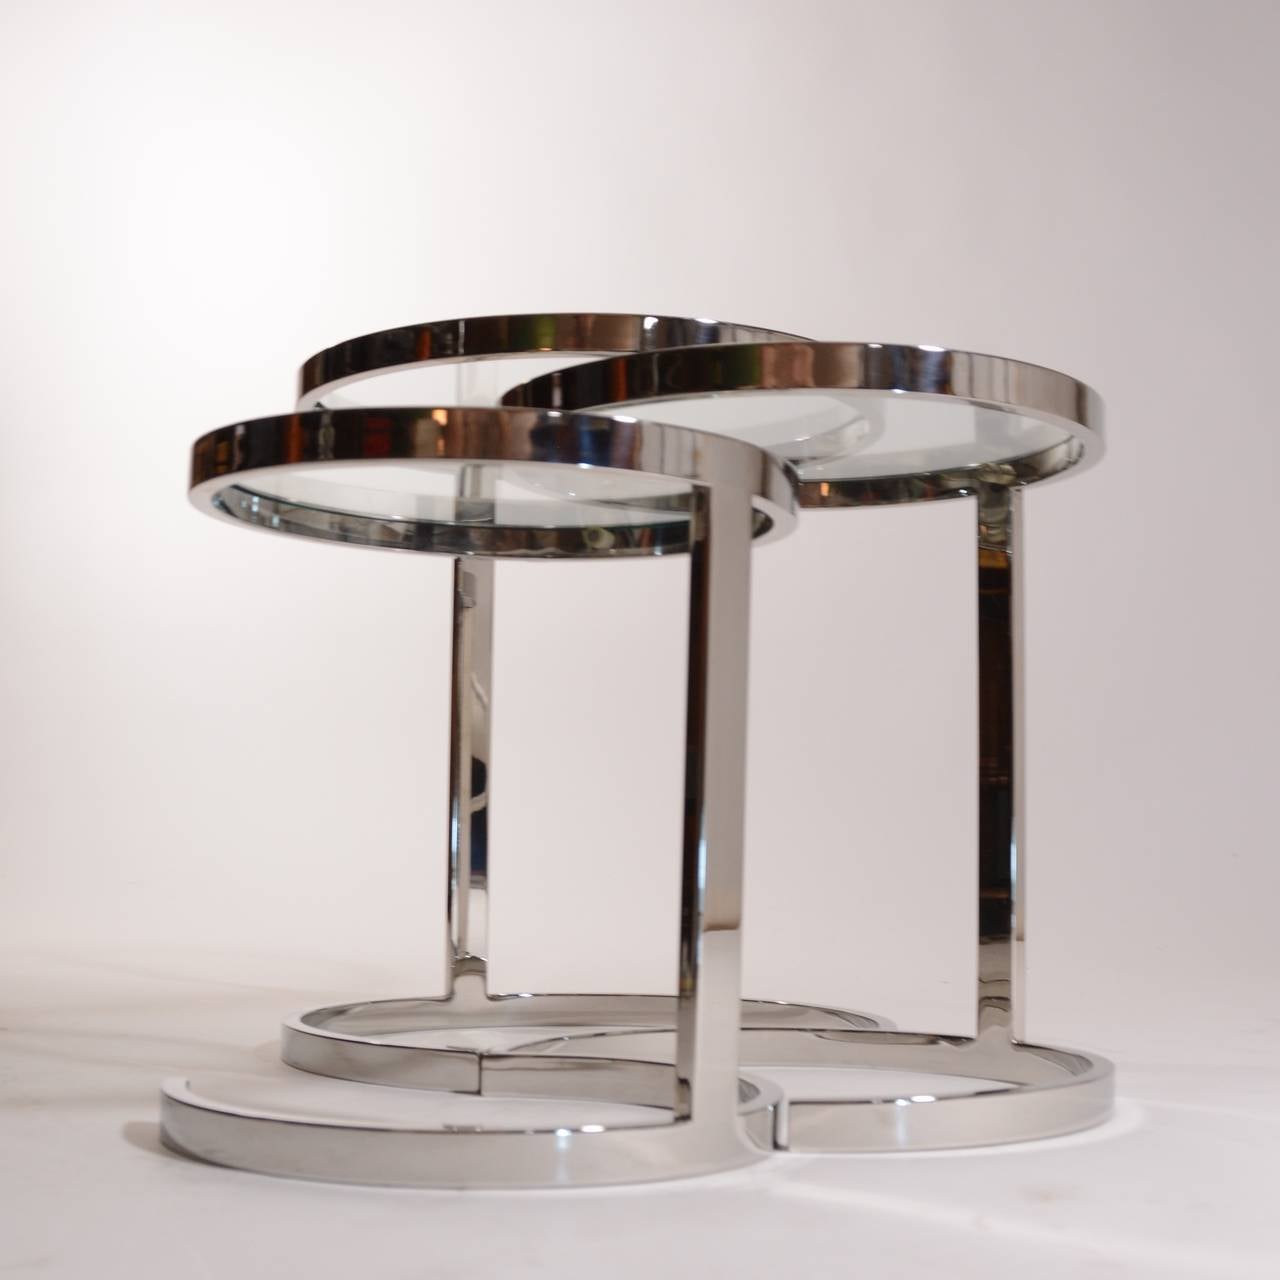 Set of 3 Nesting Stainless Steel and Glass Nesting Tables by Brueton 1